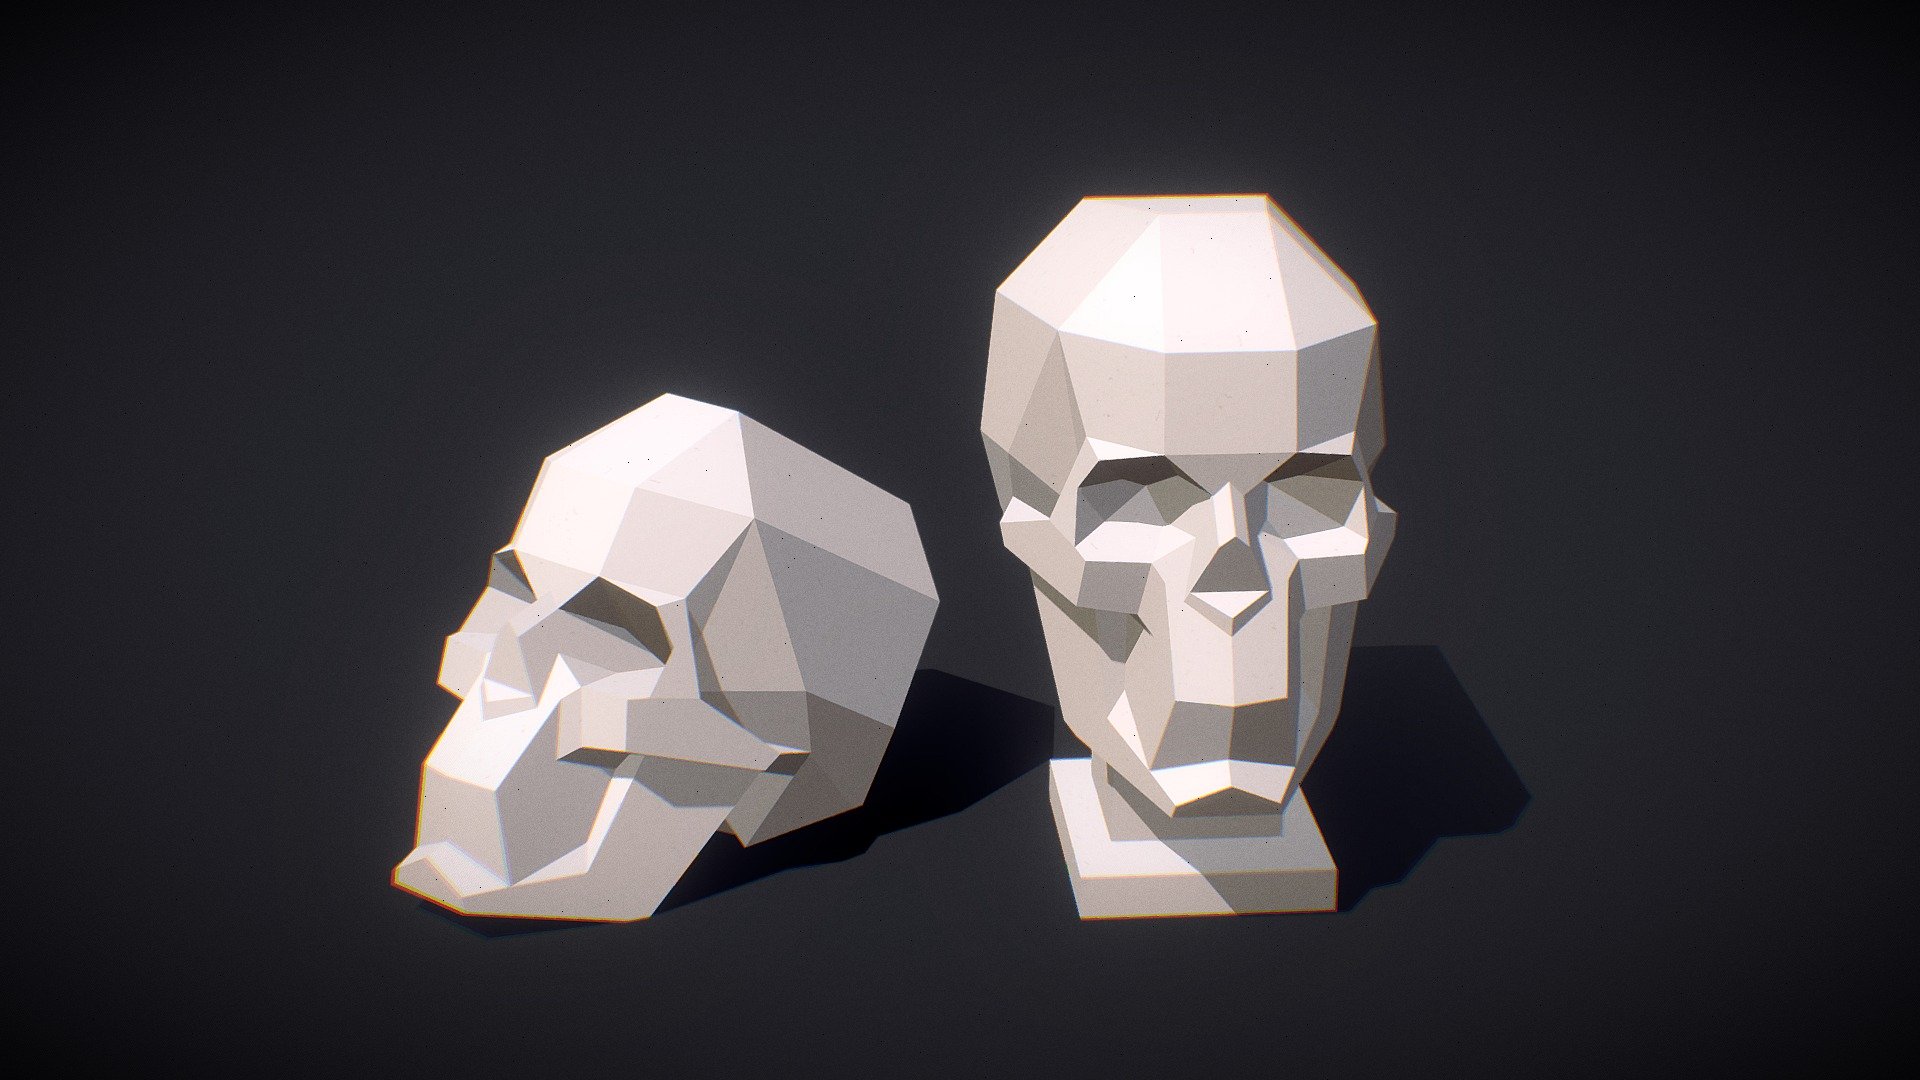 Low poly model of a skull, all faces are flat, designed for paper craft. The stand and the skull are separate objects 3d model